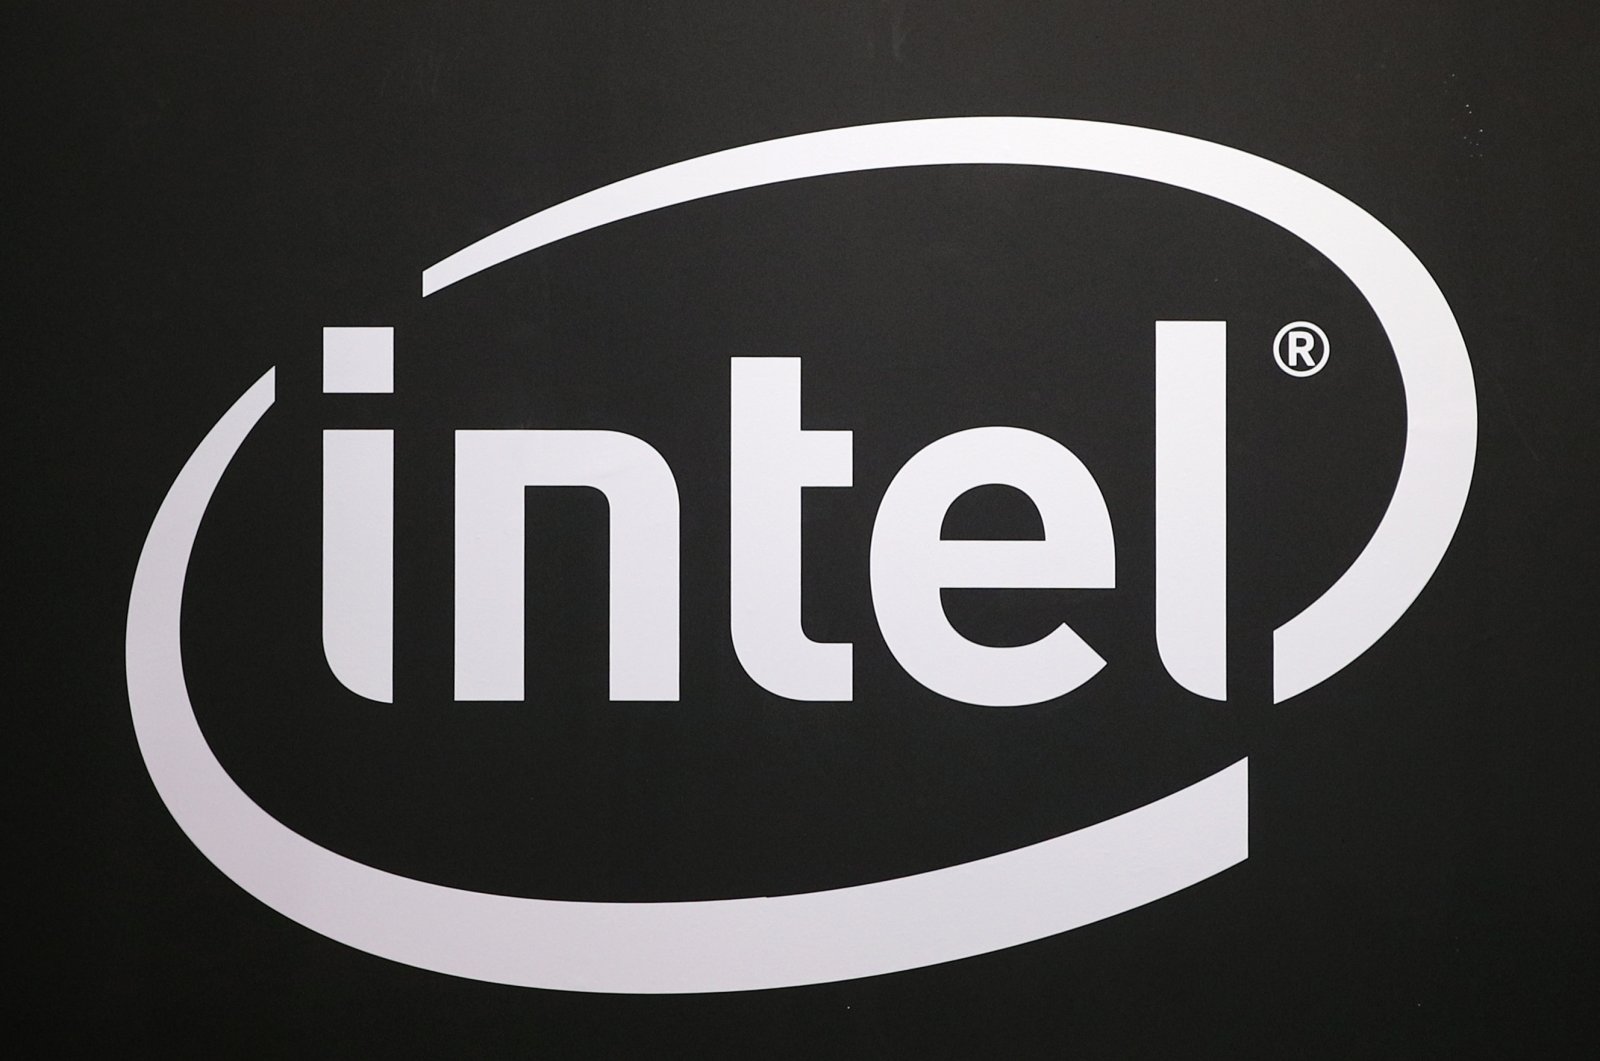 The logo of semiconductor chipmaker Intel is pictured at the Paris games week in Paris, Nov. 4, 2017. (AP Photo)